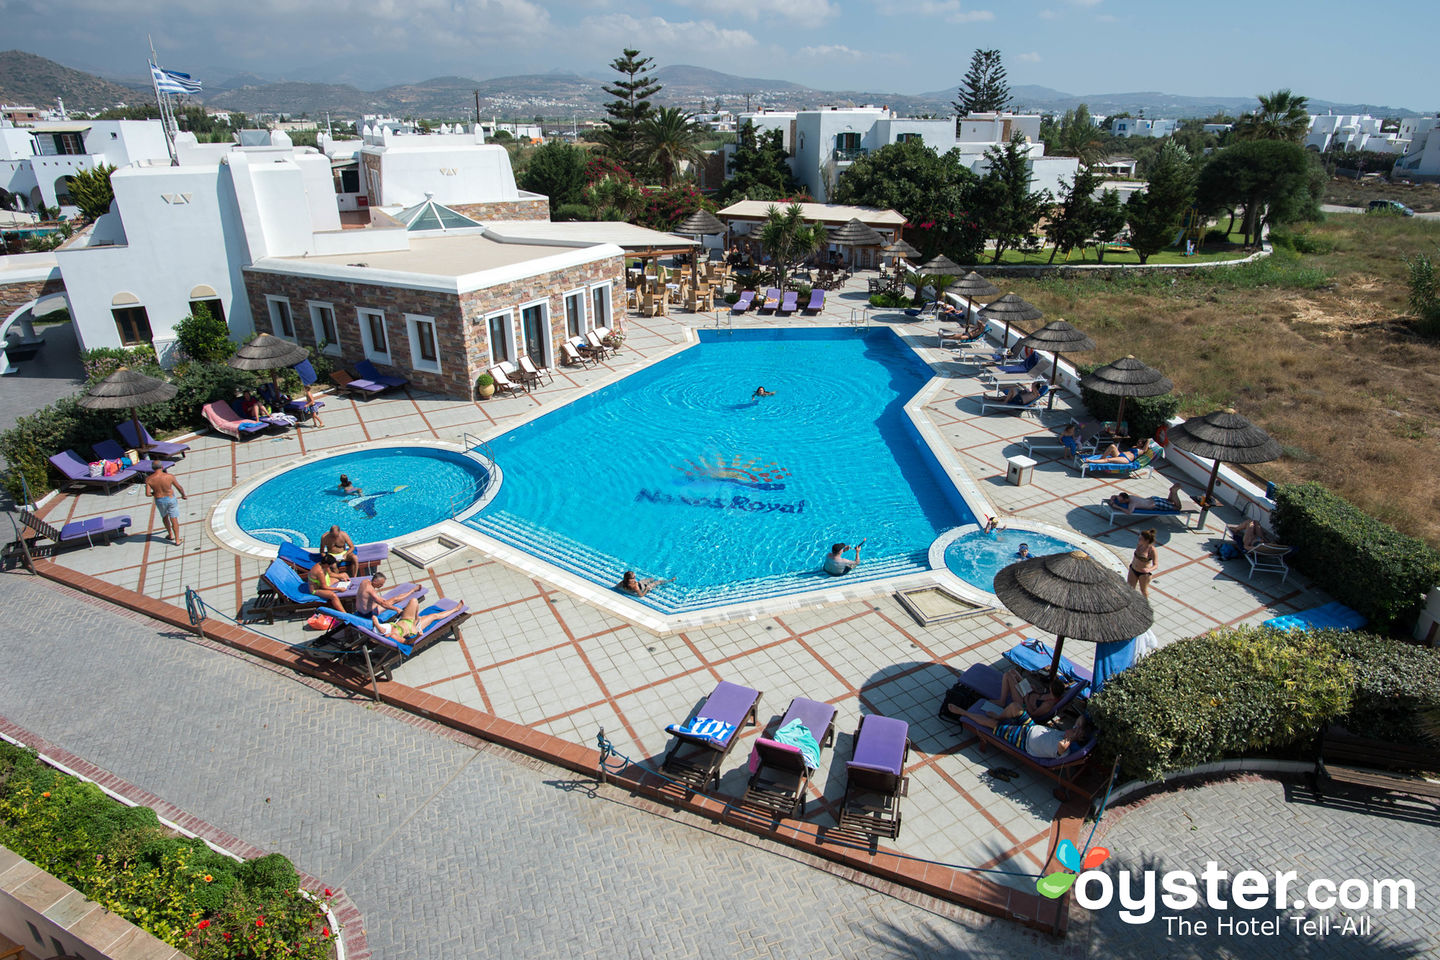 Naxos Resort Beach Hotel Review What To REALLY Expect If You Stay